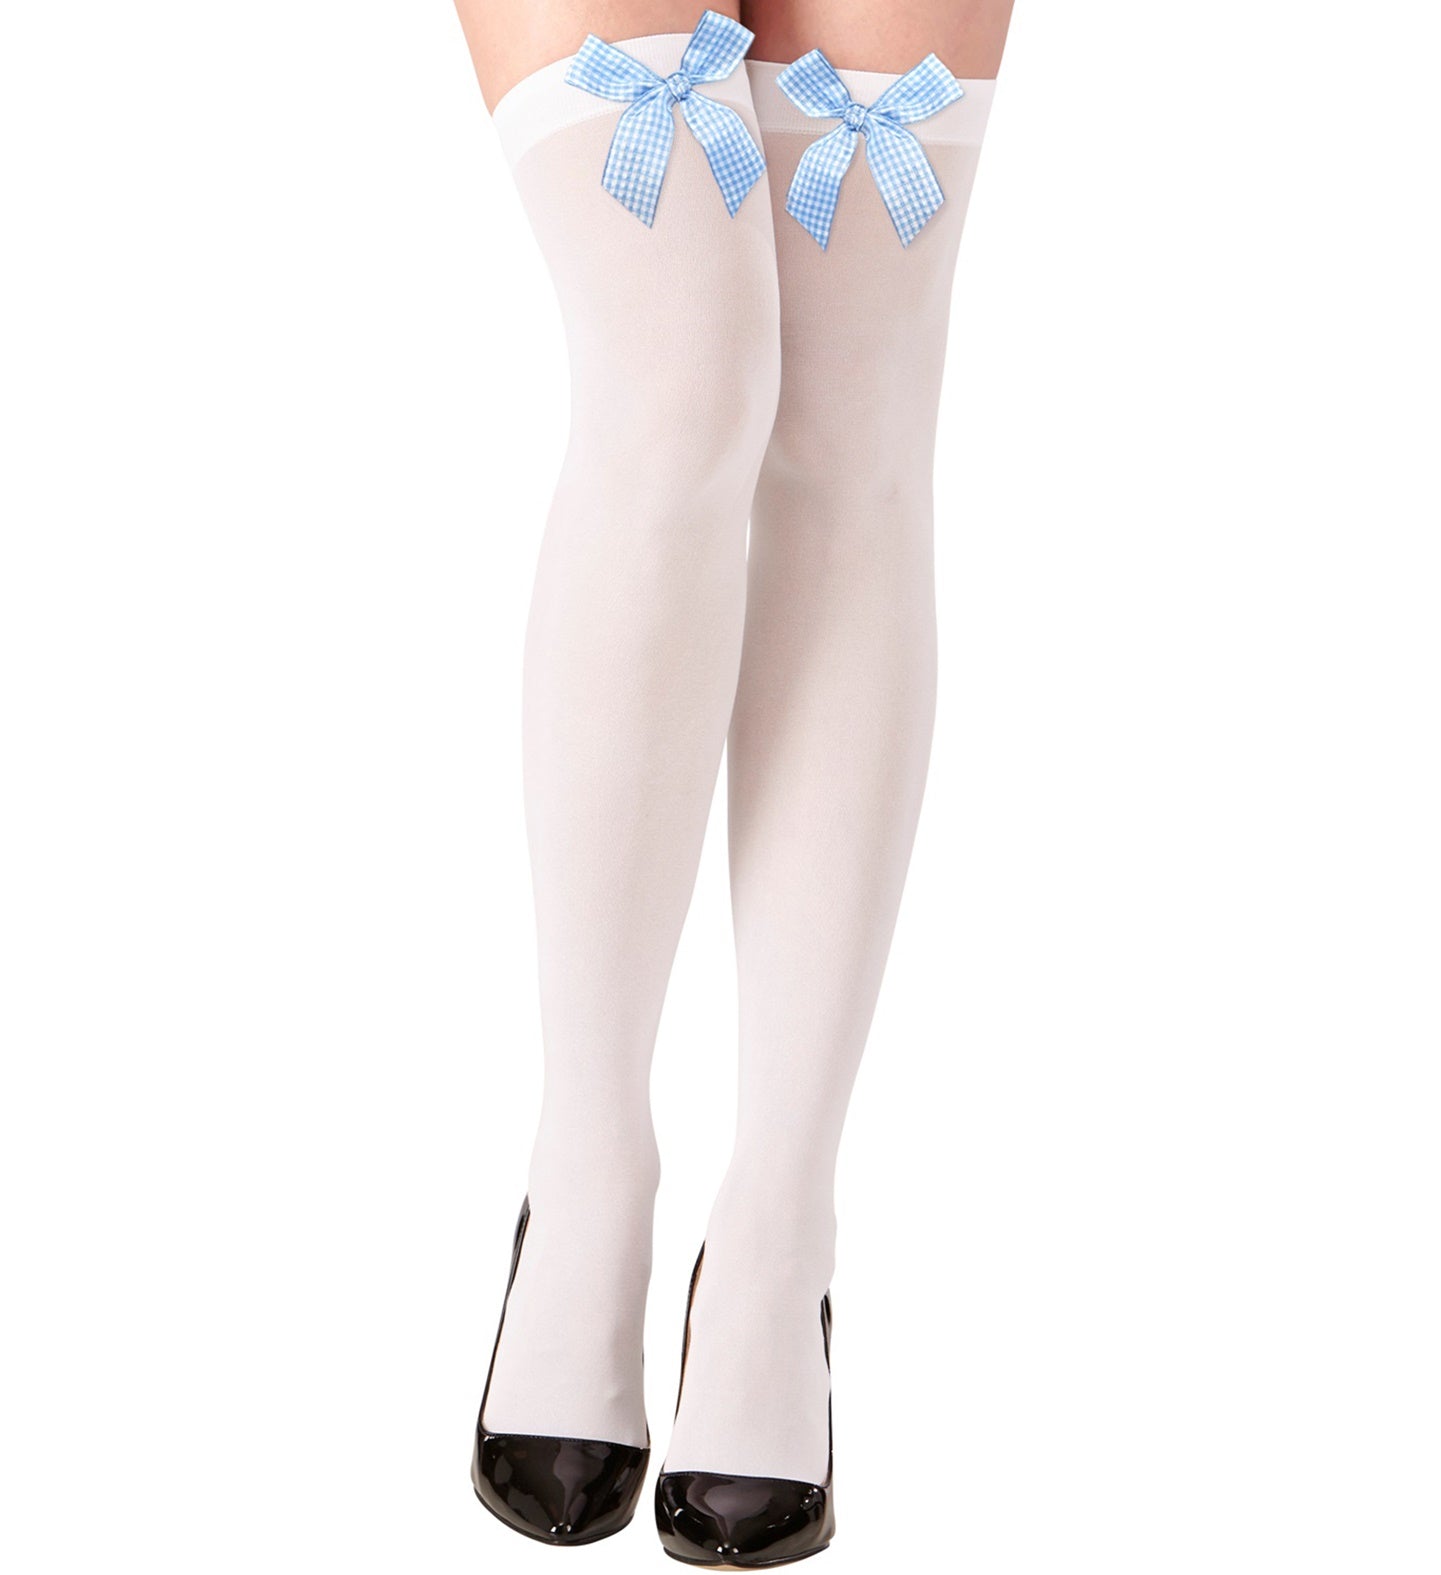 White Thigh Highs with Azure Vichy Bows